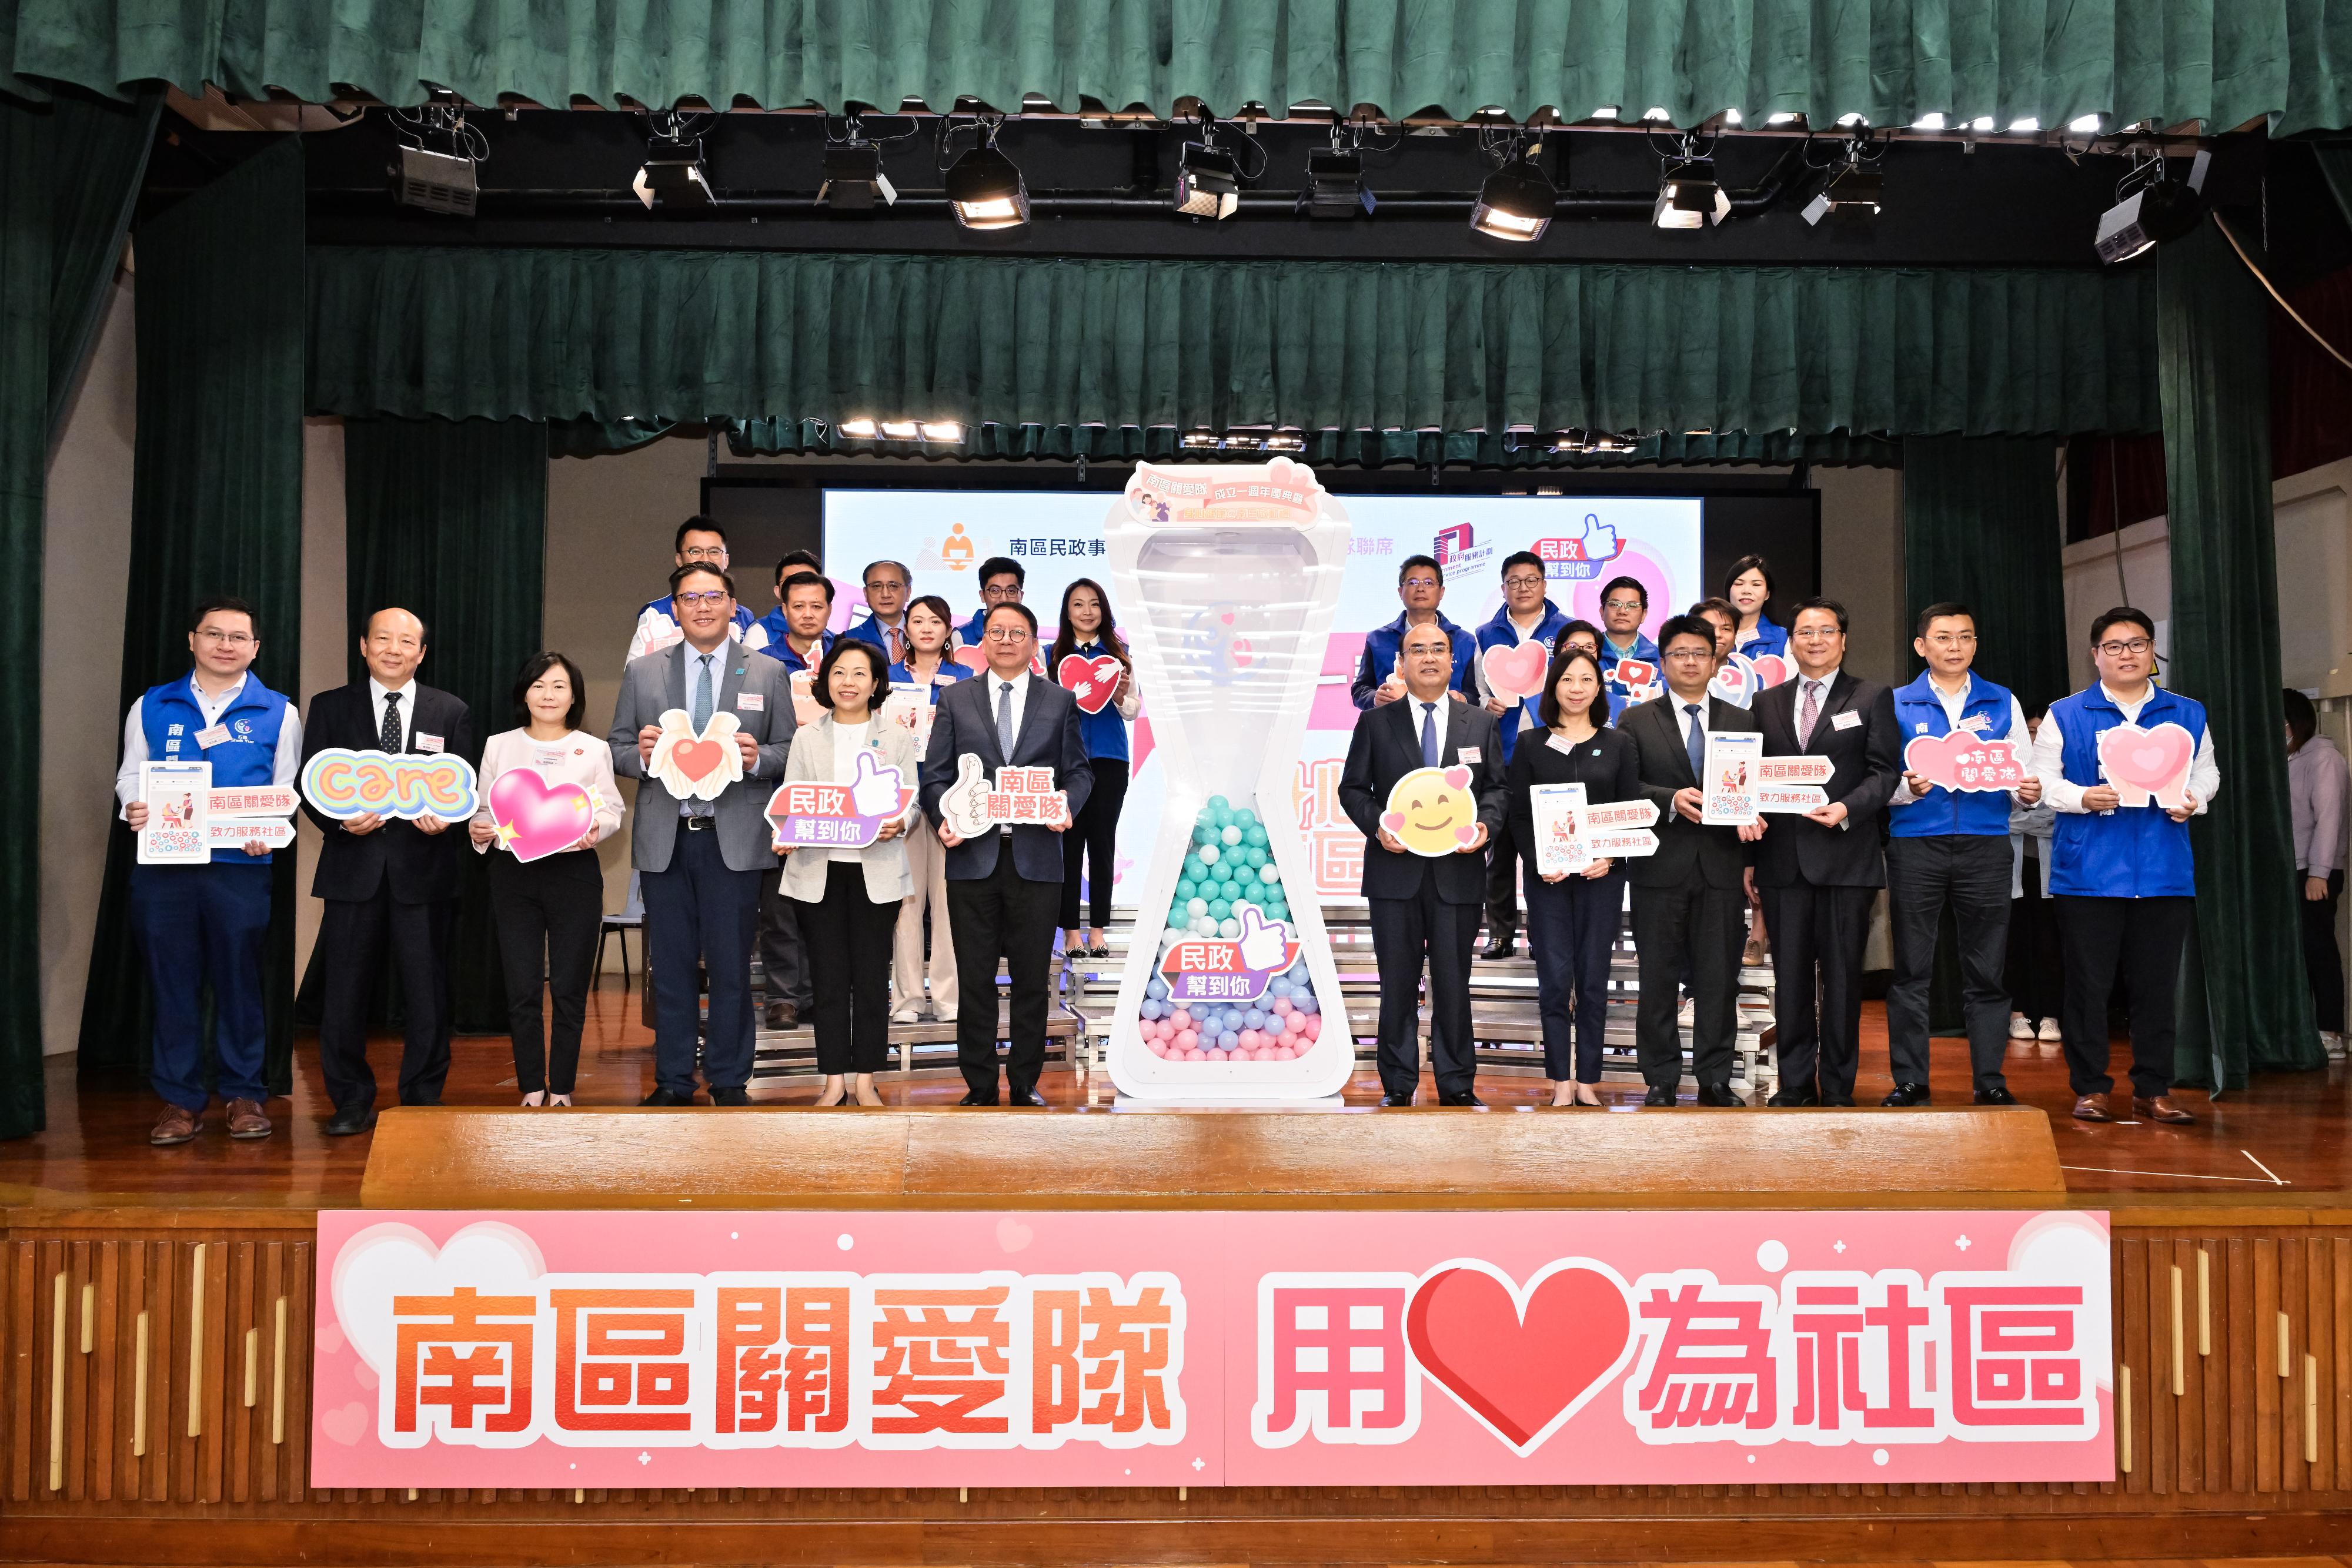 The Chief Secretary for Administration, Mr Chan Kwok-ki, attended the Care Teams in Southern District - First Anniversary and Healthy Life Launching Ceremony today (May 10). Photo shows (first row, from left) Co-convenor of the District Services and Community Care Teams in the Southern District Mr Chu Lap-wai; the President of the Hong Kong Southern District Community Care and Development Funds and the Chairman of the Hong Kong Southern District Community Association , Mr Chan Nam-po; the Director of Home Affairs, Mrs Alice Cheung; the Under Secretary for Home and Youth Affairs, Mr Clarence Leung; the Secretary for Home and Youth Affairs, Miss Alice Mak; Mr Chan Kwok-ki; the Director-General of the Hong Kong Island Sub-office of the Liaison Office of the Central People's Government in the Hong Kong Special Administrative Region (HKSAR), Mr Xue Huijun; the Permanent Secretary for Home and Youth Affairs, Ms Shirley Lam; the Deputy Director-General of the Hong Kong Island Sub-office of the Liaison Office of the Central People's Government in the HKSAR, Mr Wang Hui; the District Officer (Southern), Mr Francis Cheng; the Principal Chairman of the Hong Kong Southern District Community Care and Development Funds, Mr Xue Boran; and Co-vice Convenor of the District Services and Community Care Teams in the Southern District Mr Pang Siu-kei, officiating at the launching ceremony.